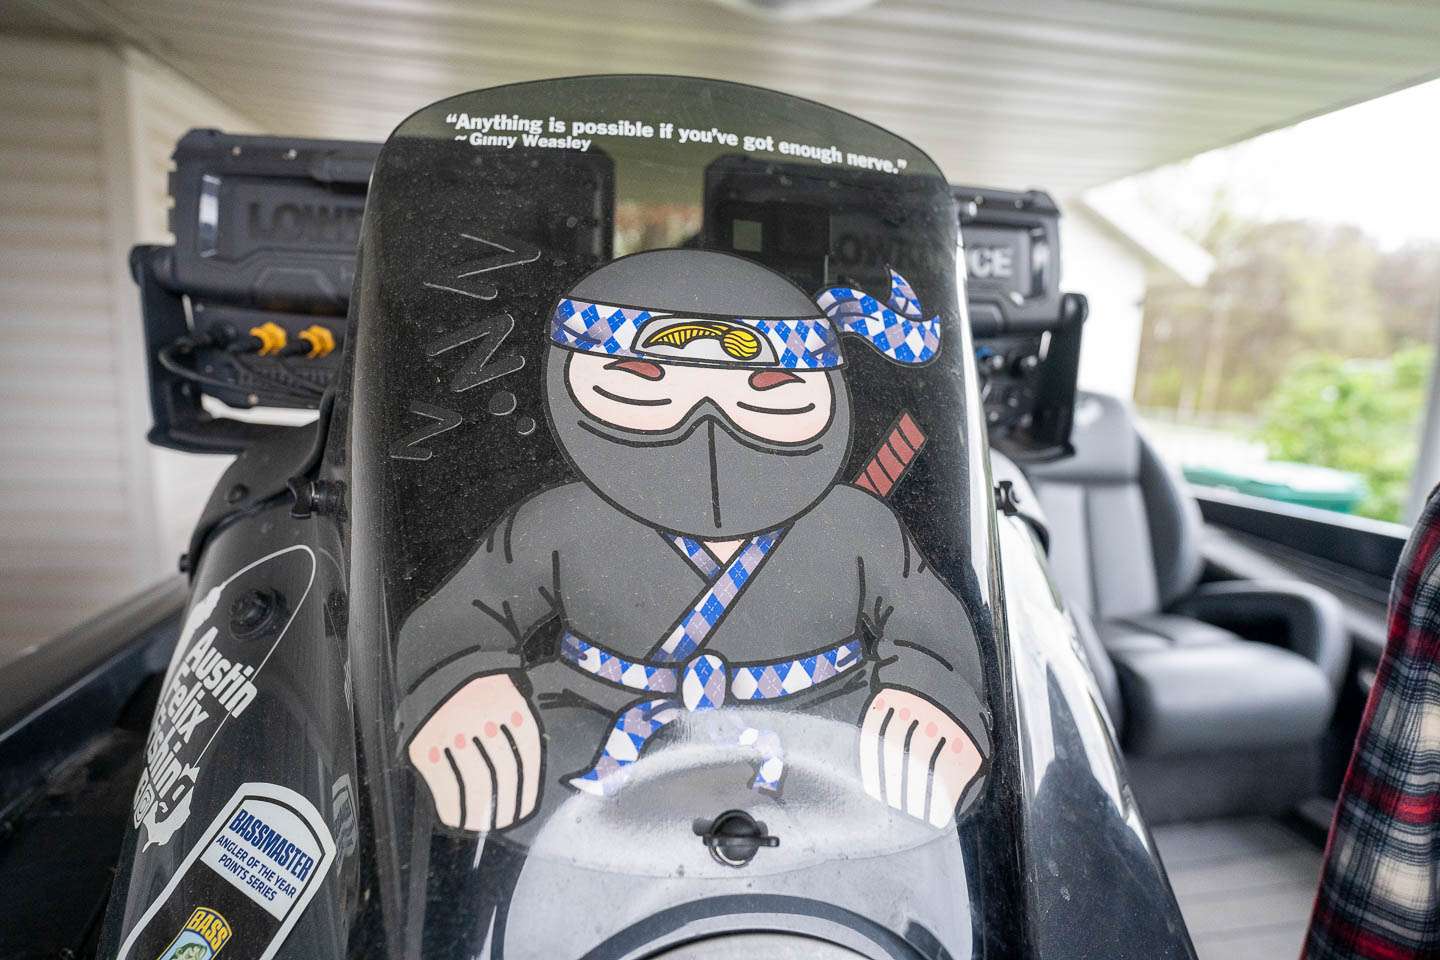 Unlike any other Elite pro, a cartoon drawing of a Sleepy Assassin sits on his windshield. Dave Mercer gave Austin this nickname, and the only thing to do at that point is lean into it because once you receive a Mercer nickname, it isn't going away. Timothy Harmon, a local aspiring artist, drew him this picture, and he put it on his boat and truck. 